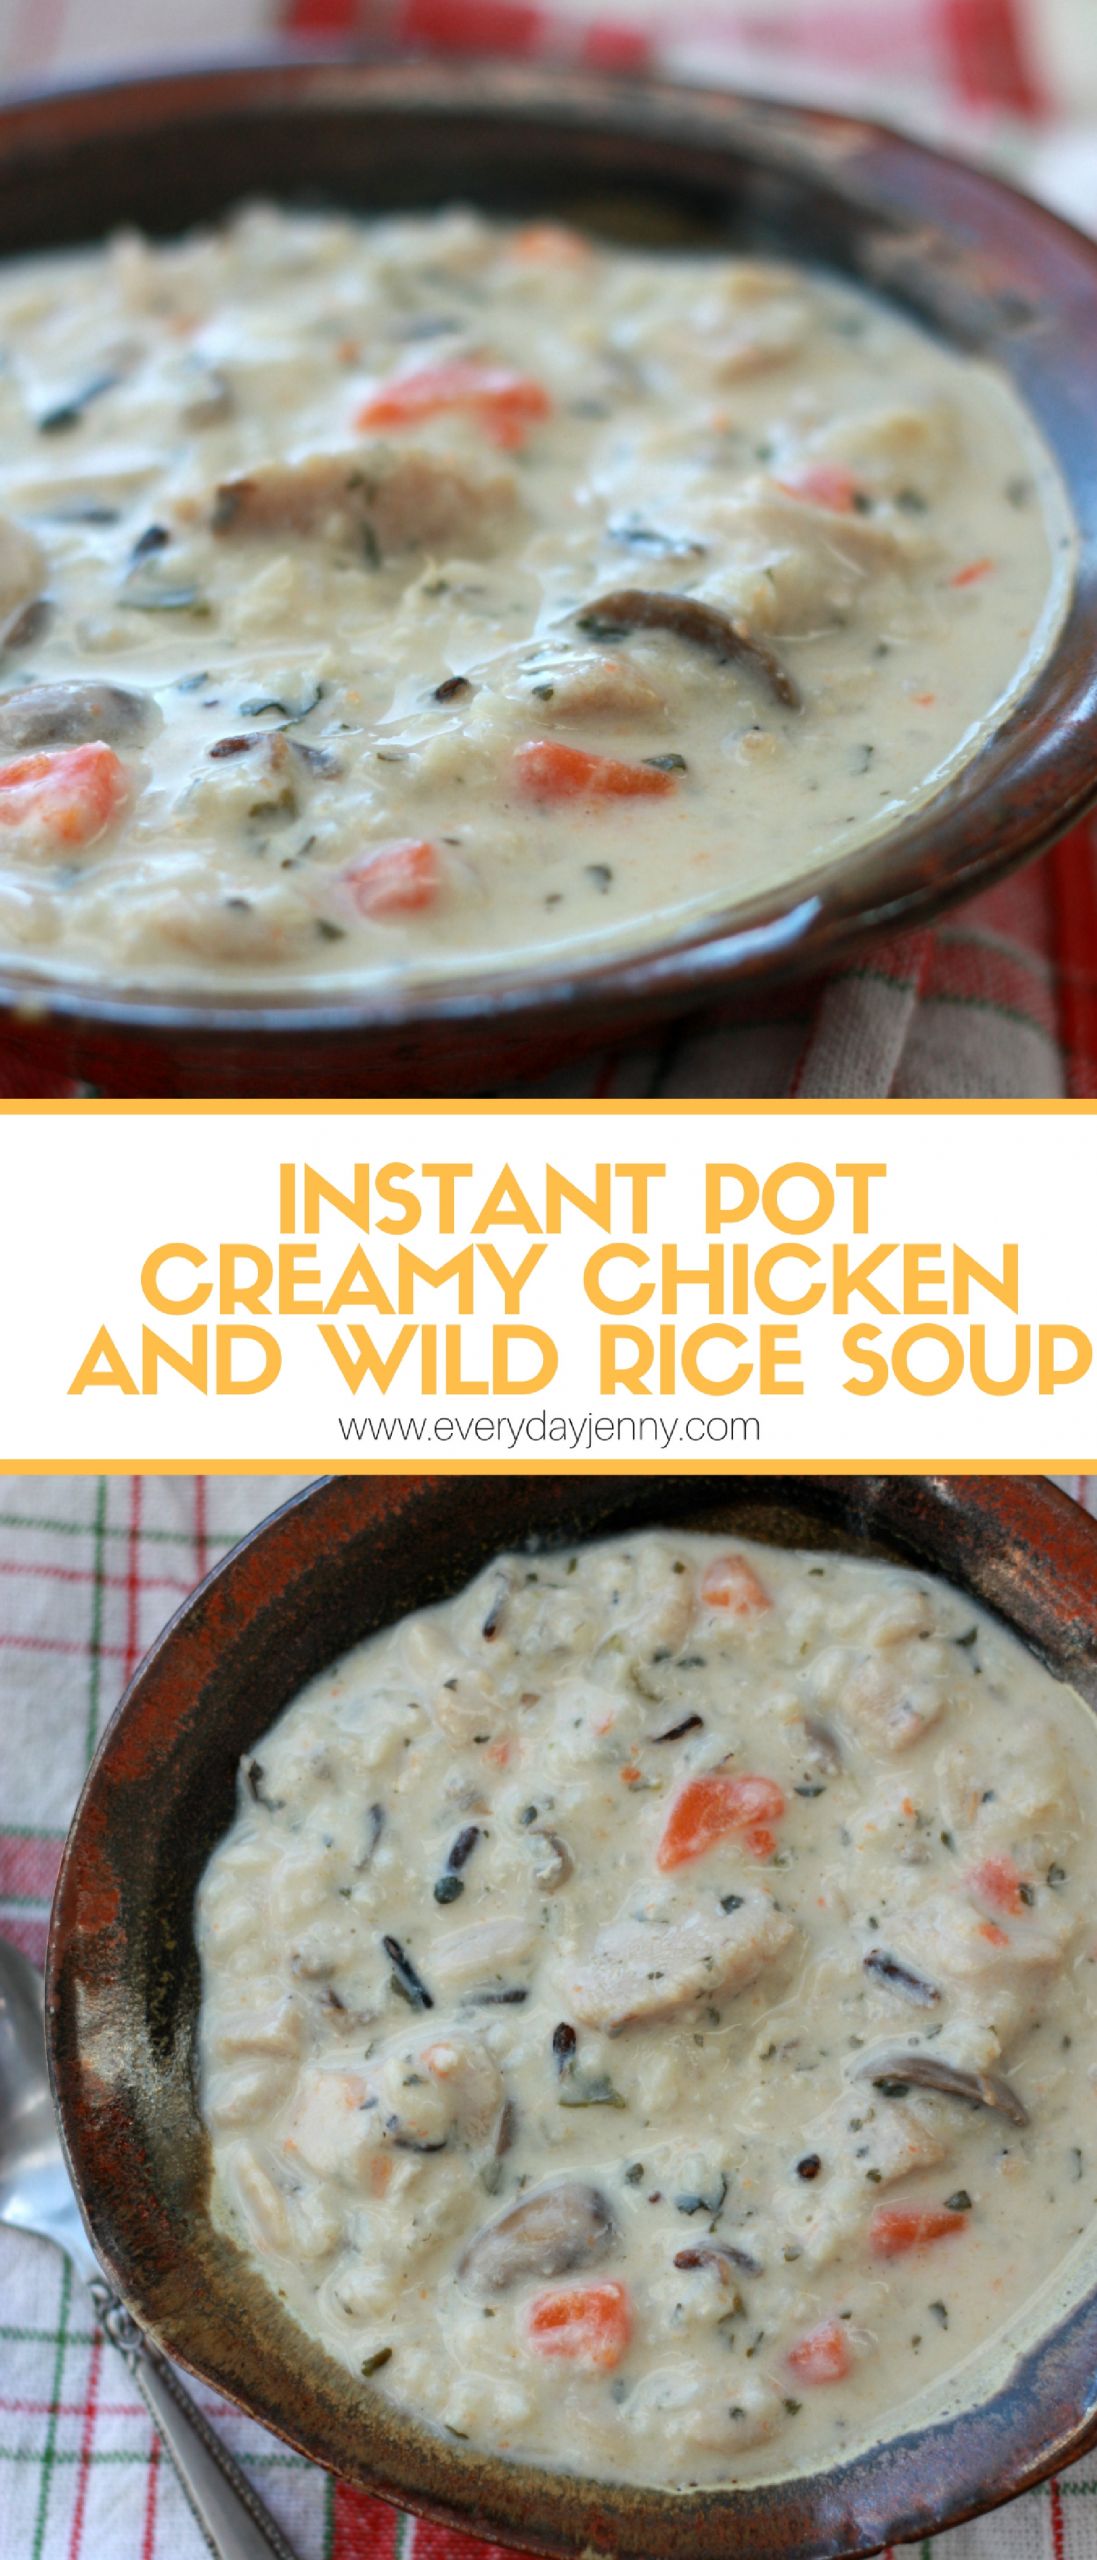 Instant Pot Chicken Rice Soup
 INSTANT POT CREAMY CHICKEN AND WILD RICE SOUP